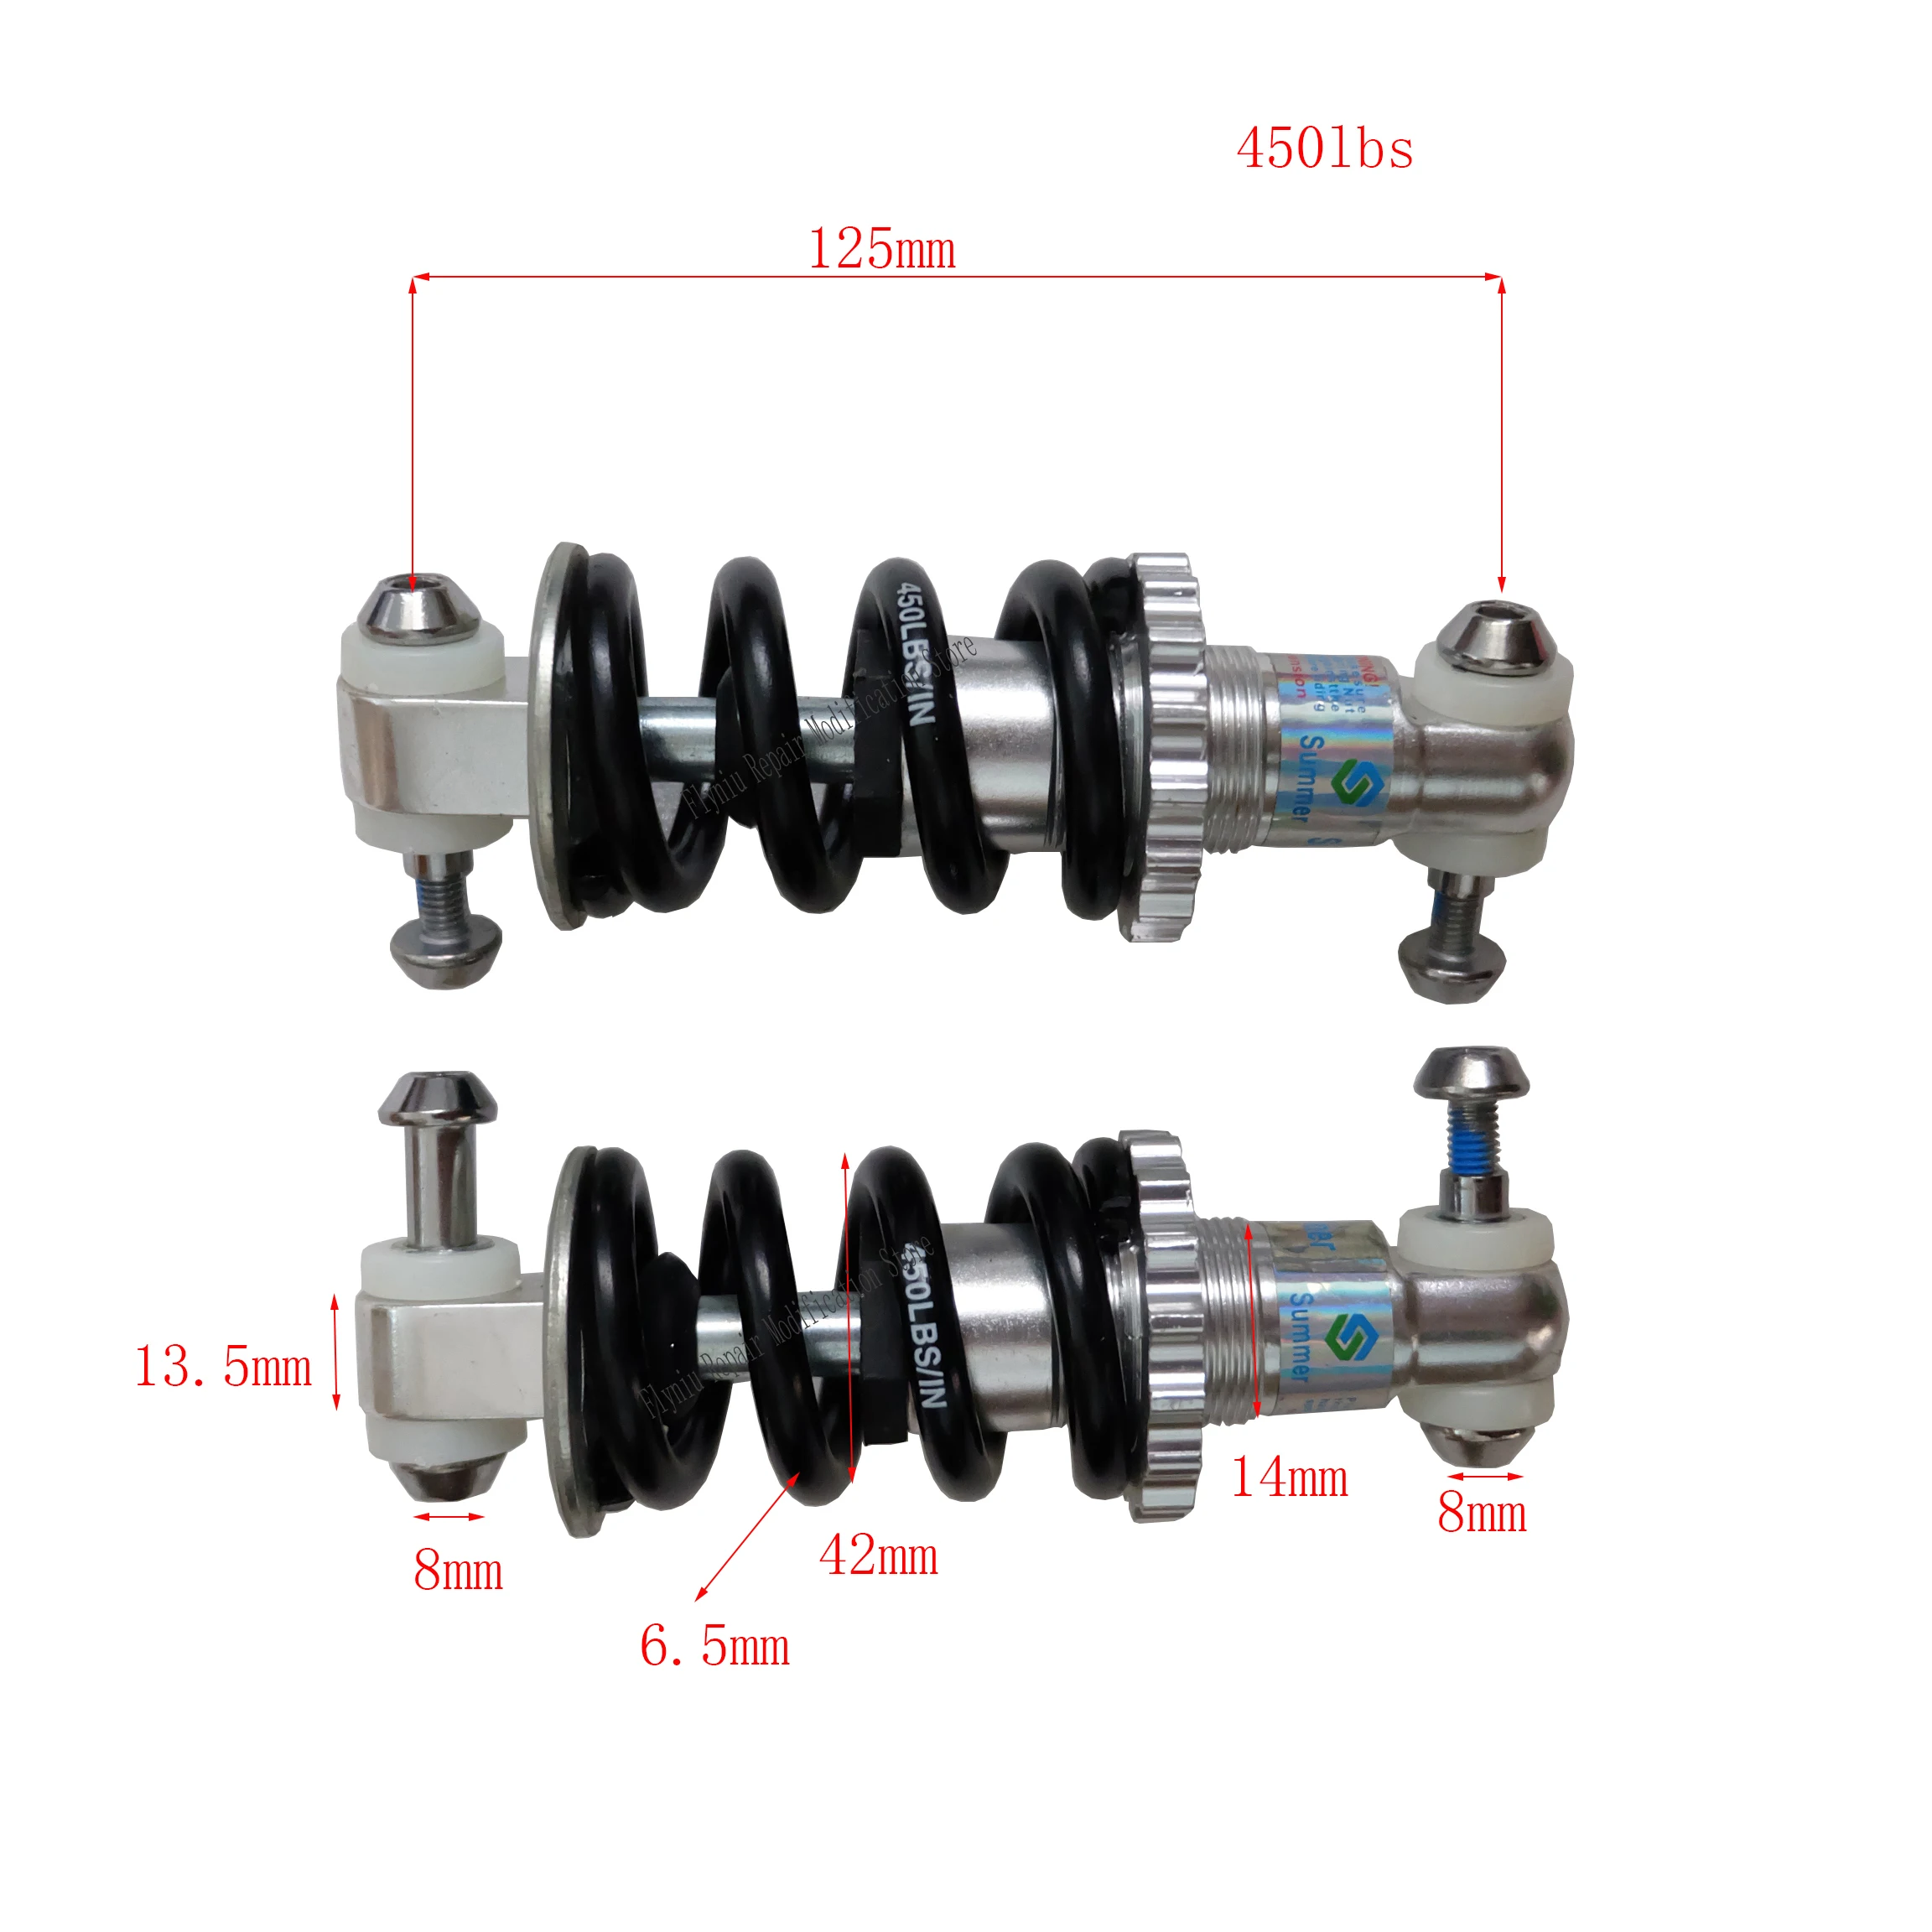 125mm Shock Suspension Bumper Spring Shock Absorber Parts Rear Shock For Mini off-road ATV Electric Bicycle Scooter EBike Spring